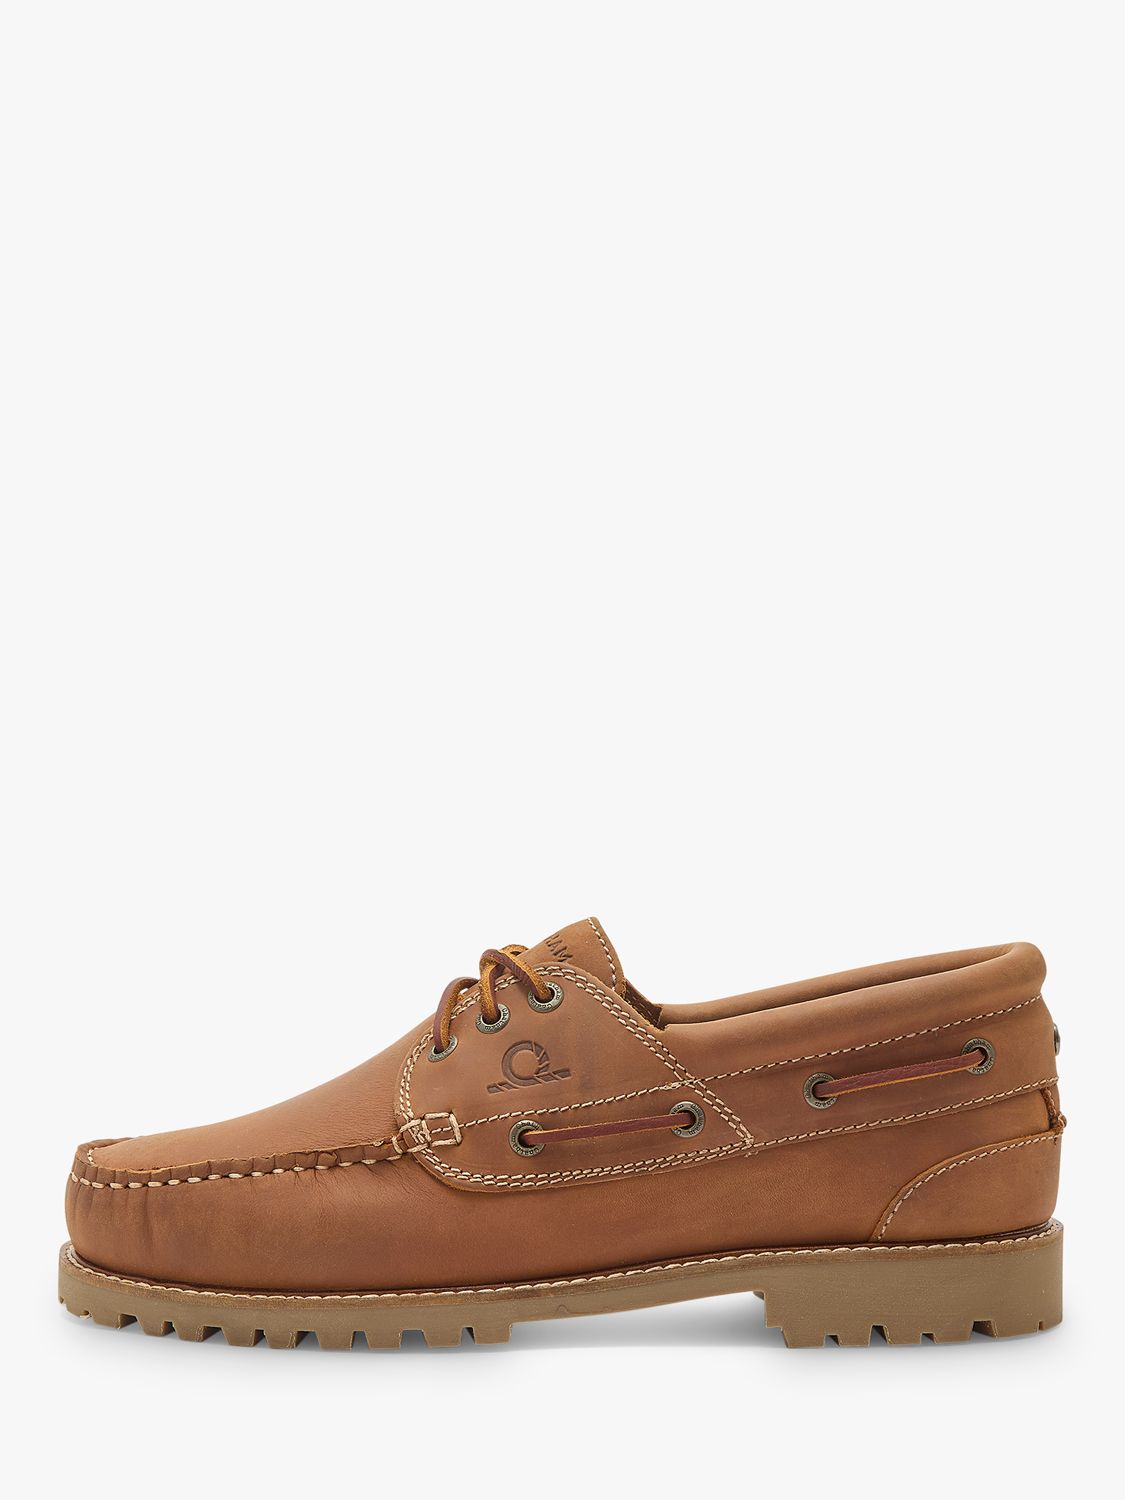 Chatham Sperrin Leather Boat Shoes, Tan, 6S